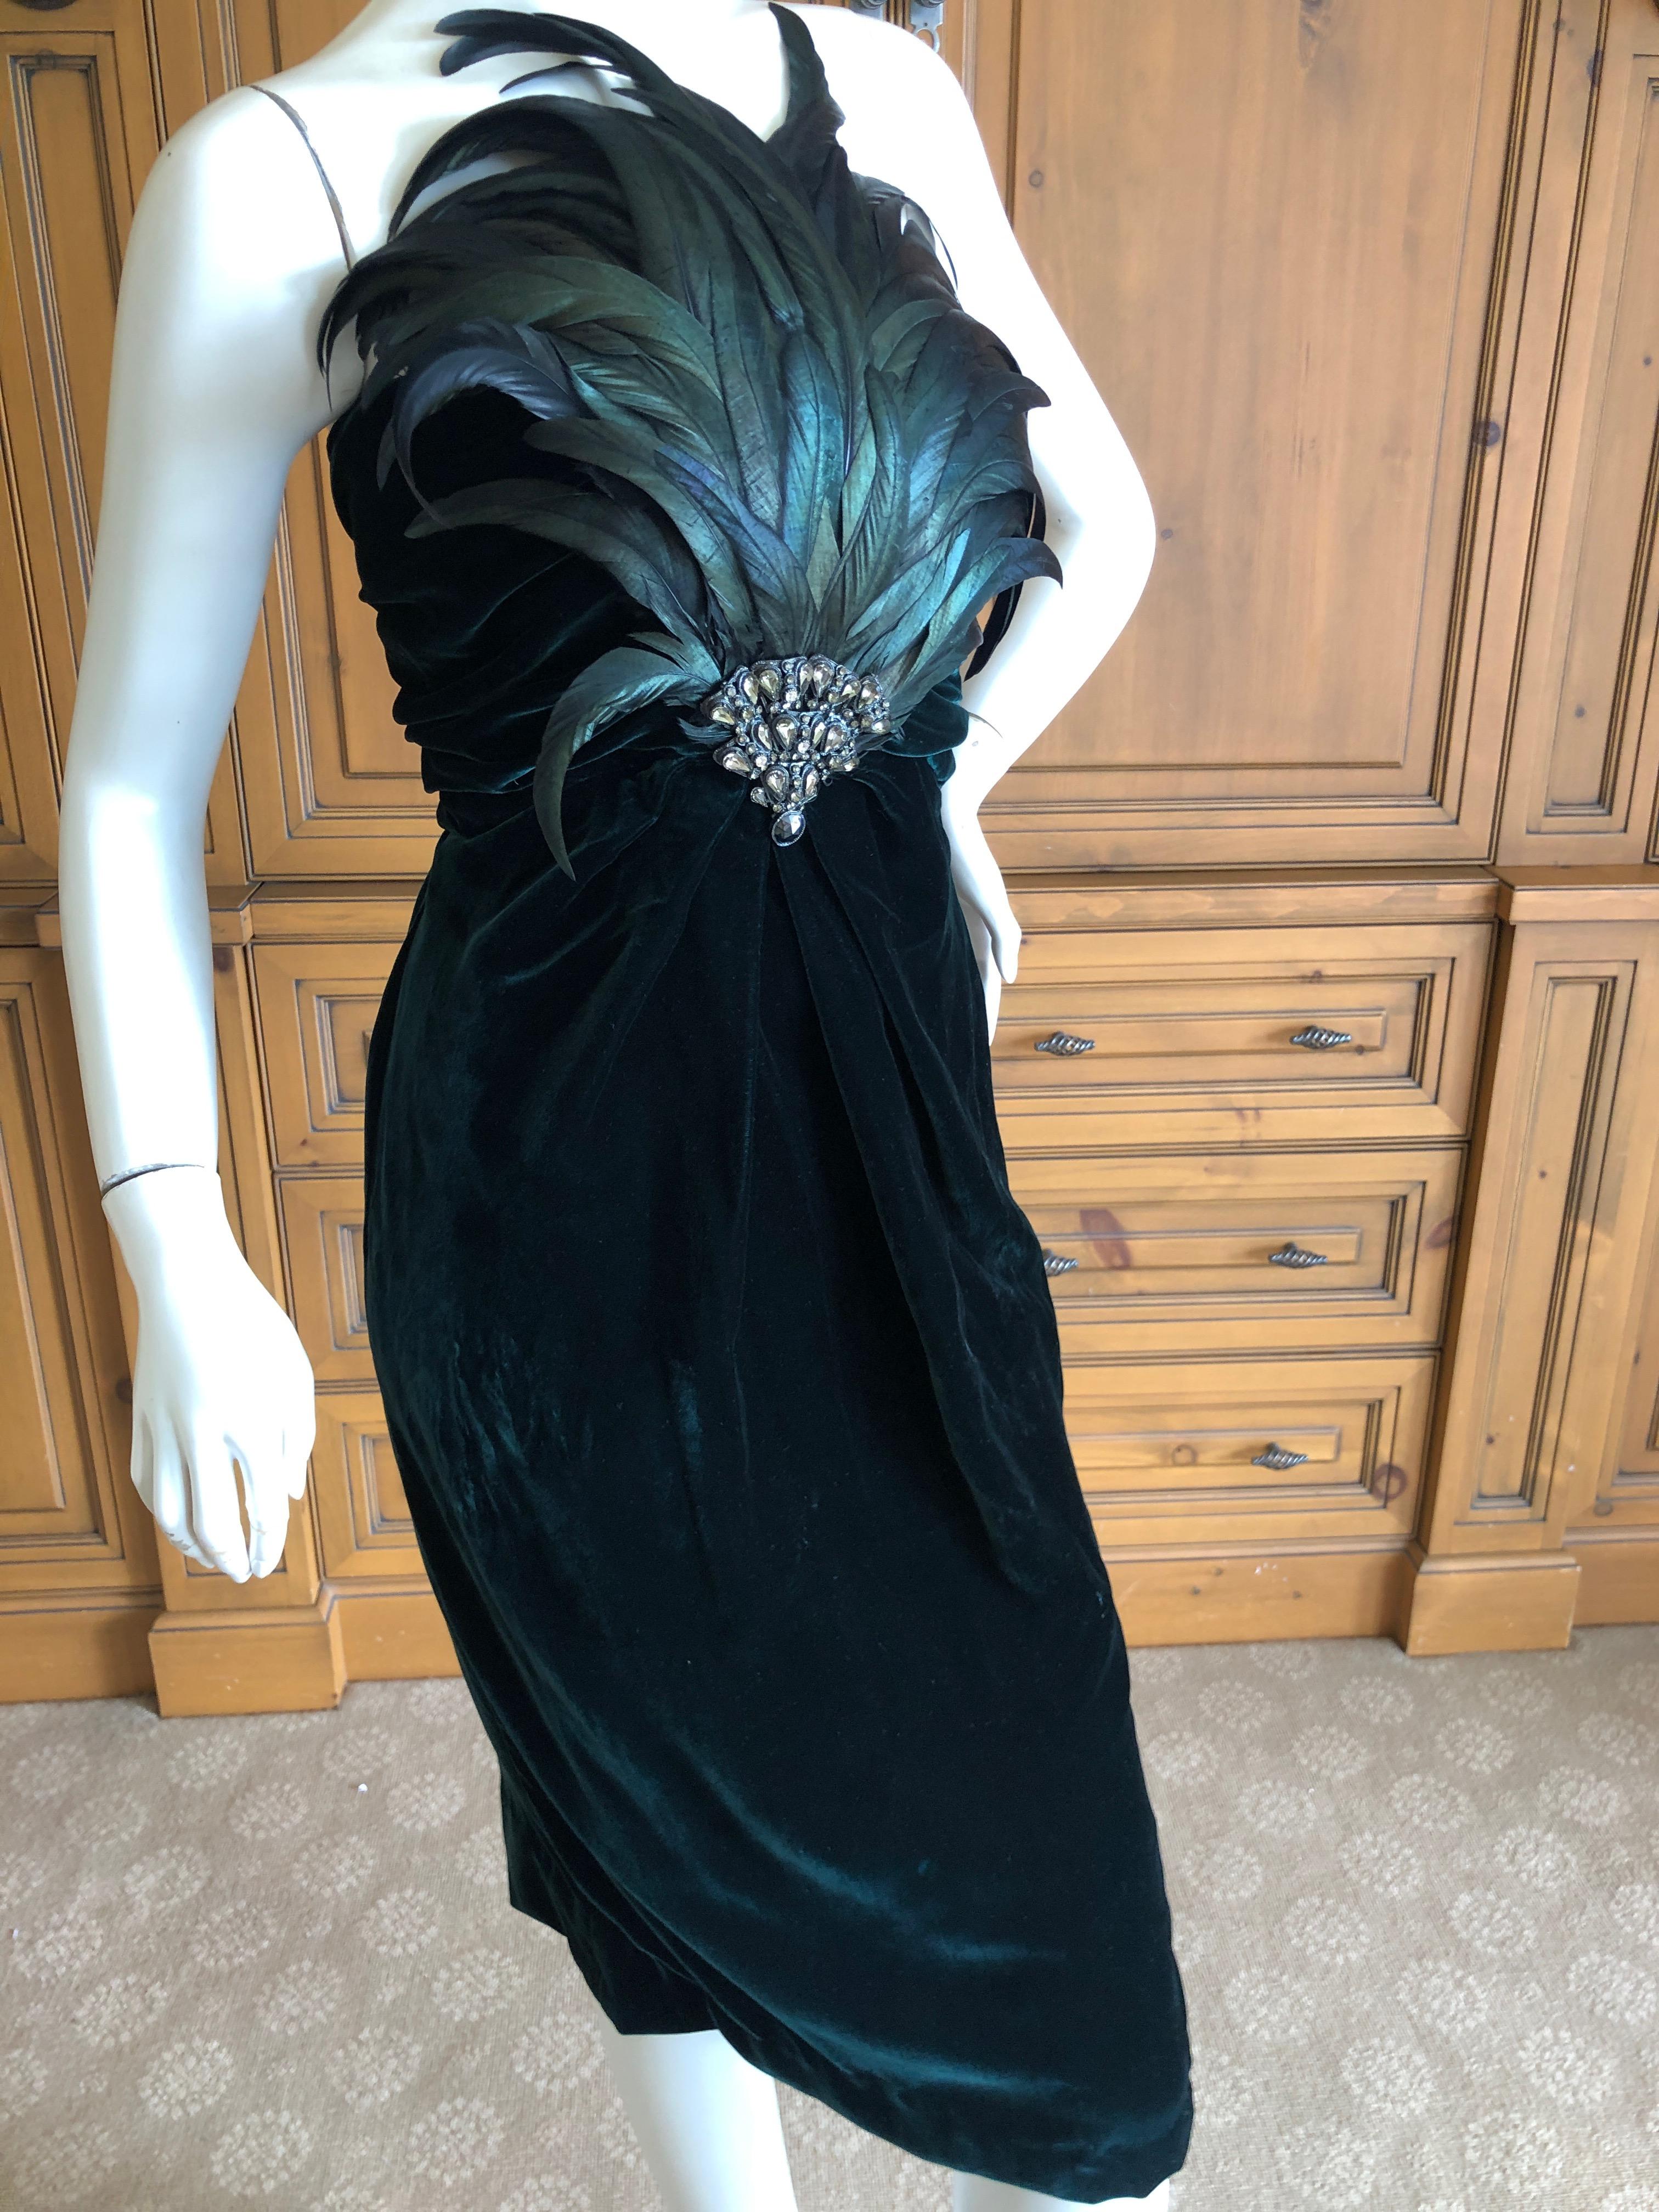 Bill Blass Fall 1986 Green Velvet Jeweled & Feathered Strapless Cocktail Dress  For Sale 4